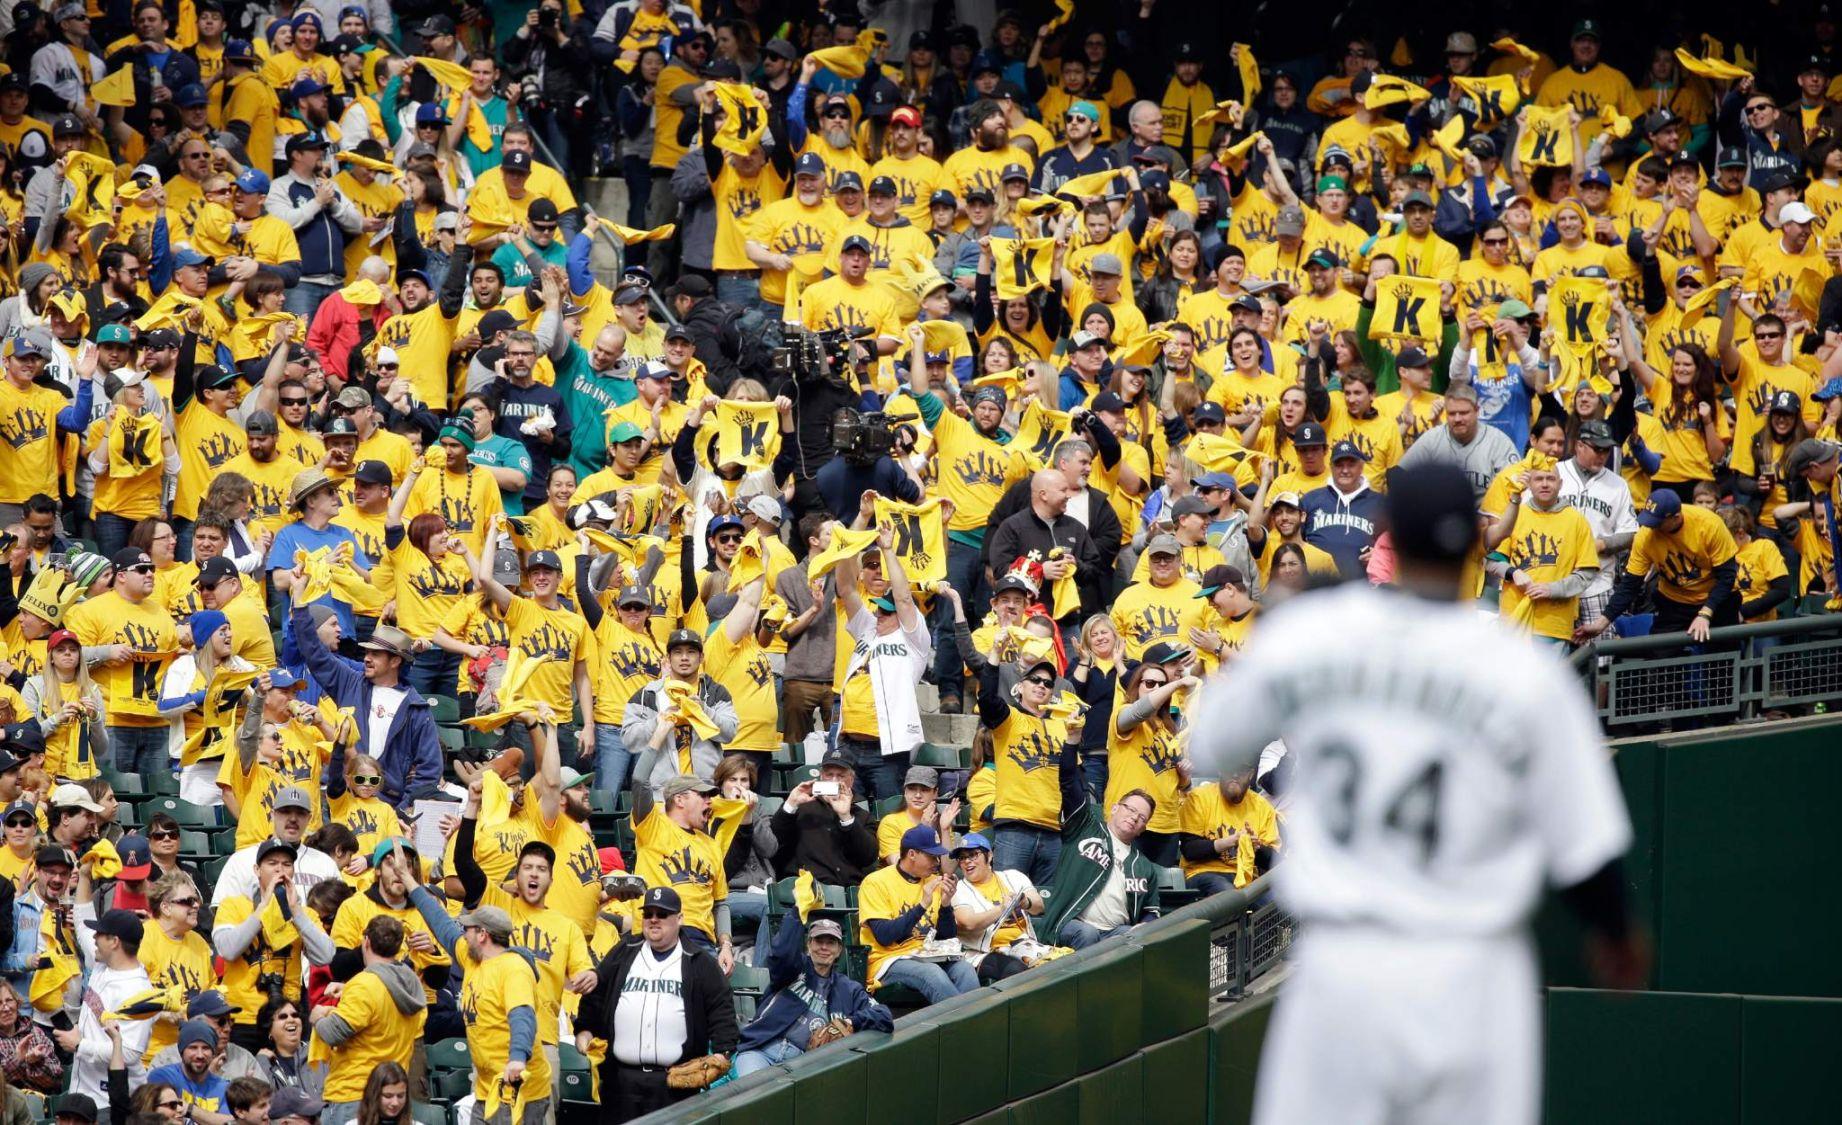 Mariners fans keeping their postseason dreams alive after Tuesday